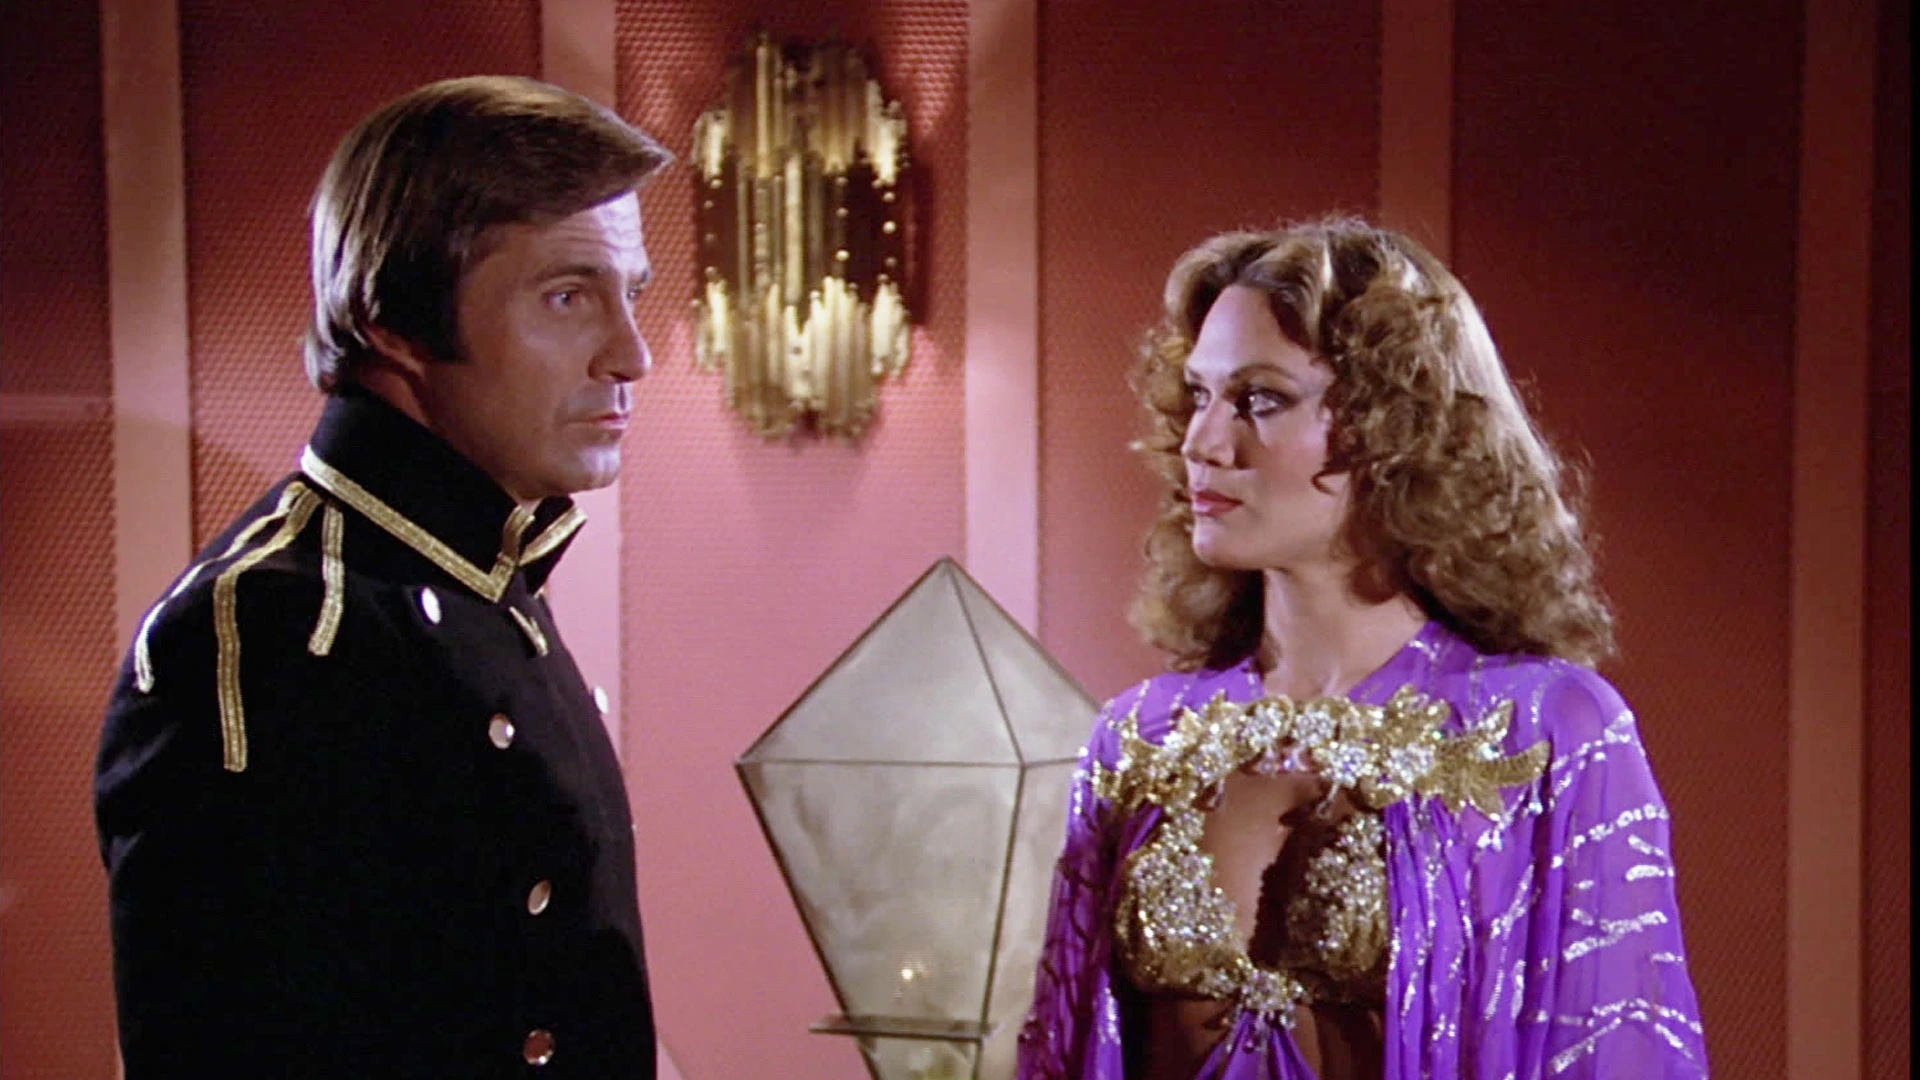 Buck Rogers In The 25th Century': The Complete Collection Blu-Ray Review -  Escapist Sci-Fi Series Gets Lovely HD Upgrade